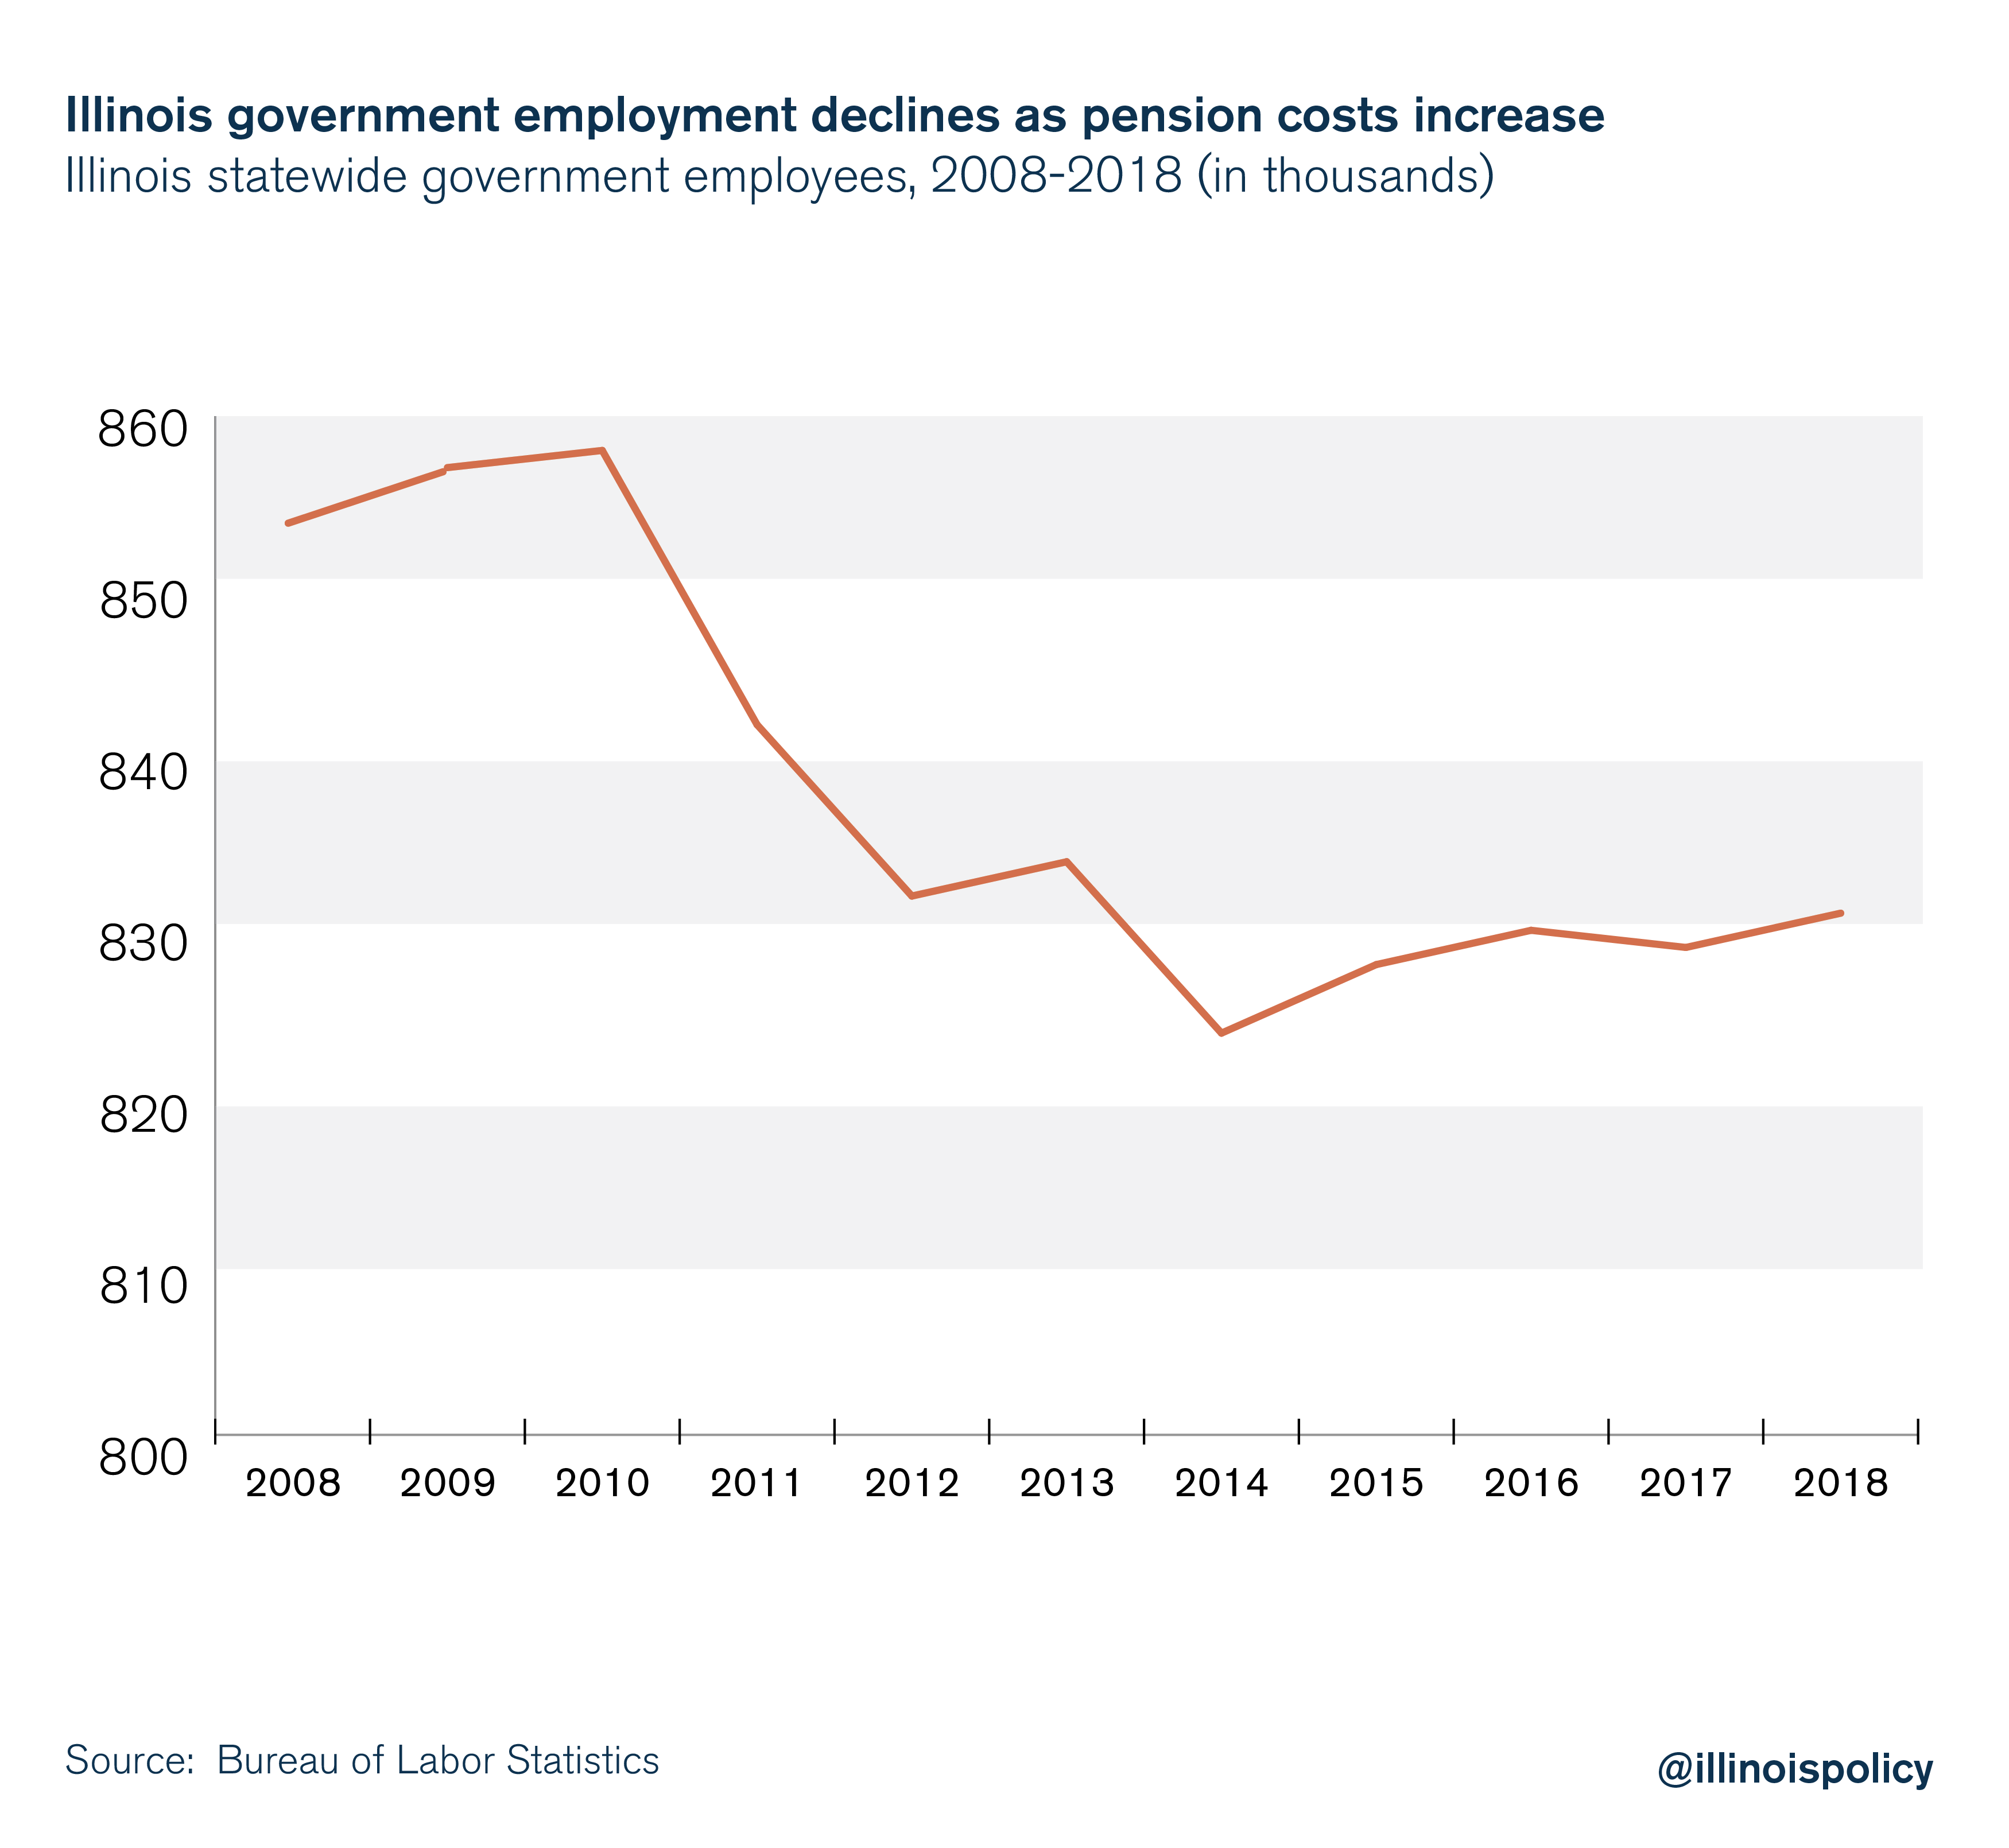 Illinois government employment declines as pension costs increase